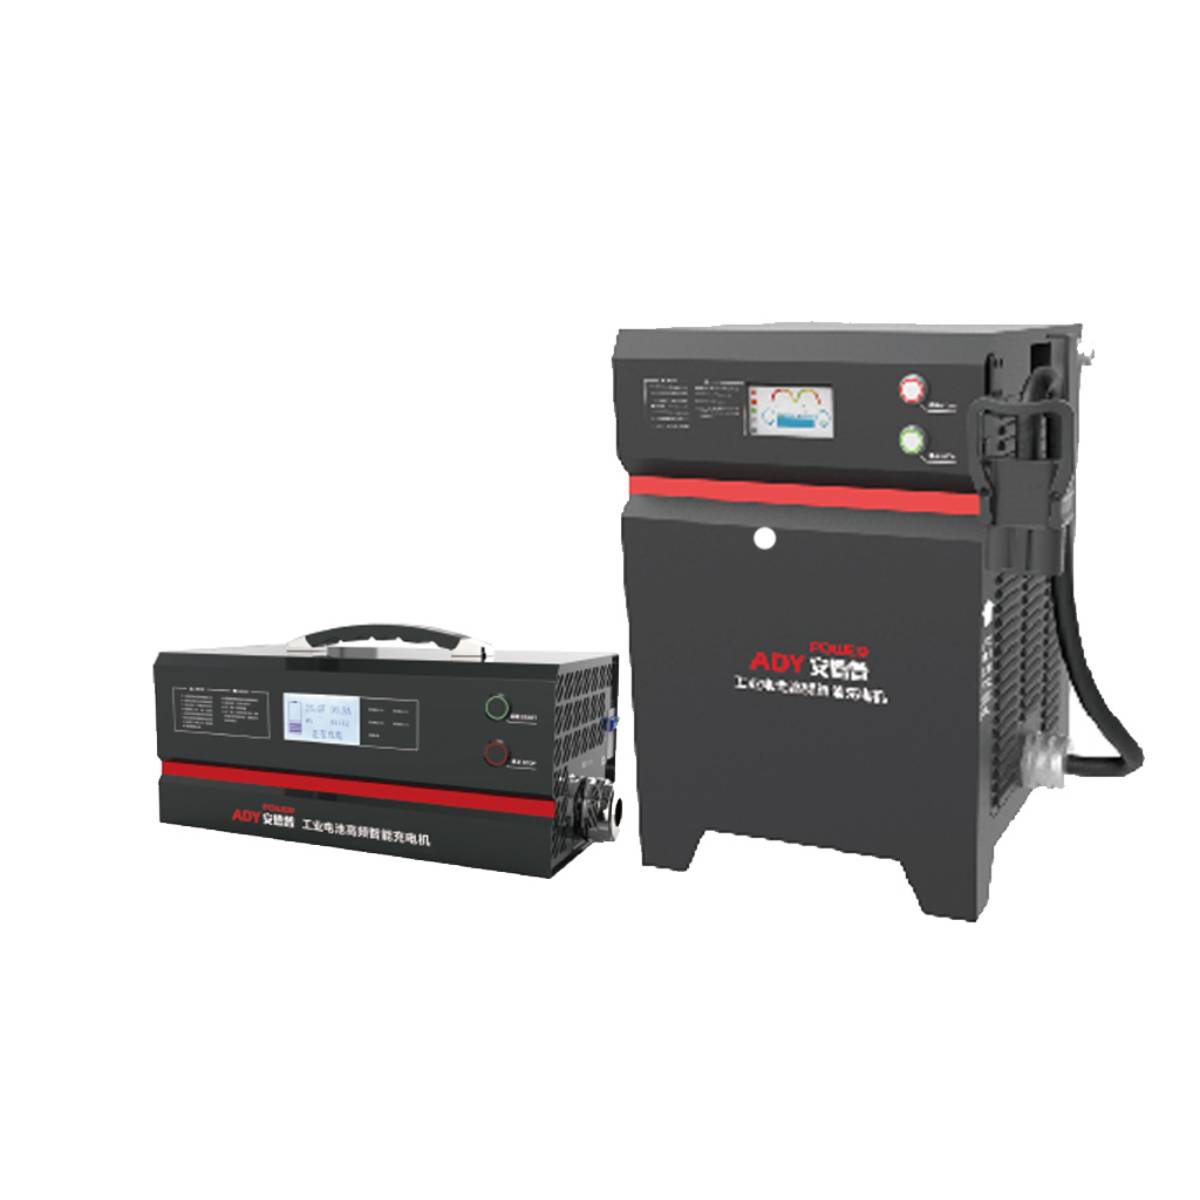 Lithium Ion forklift Battery Charger.jpg